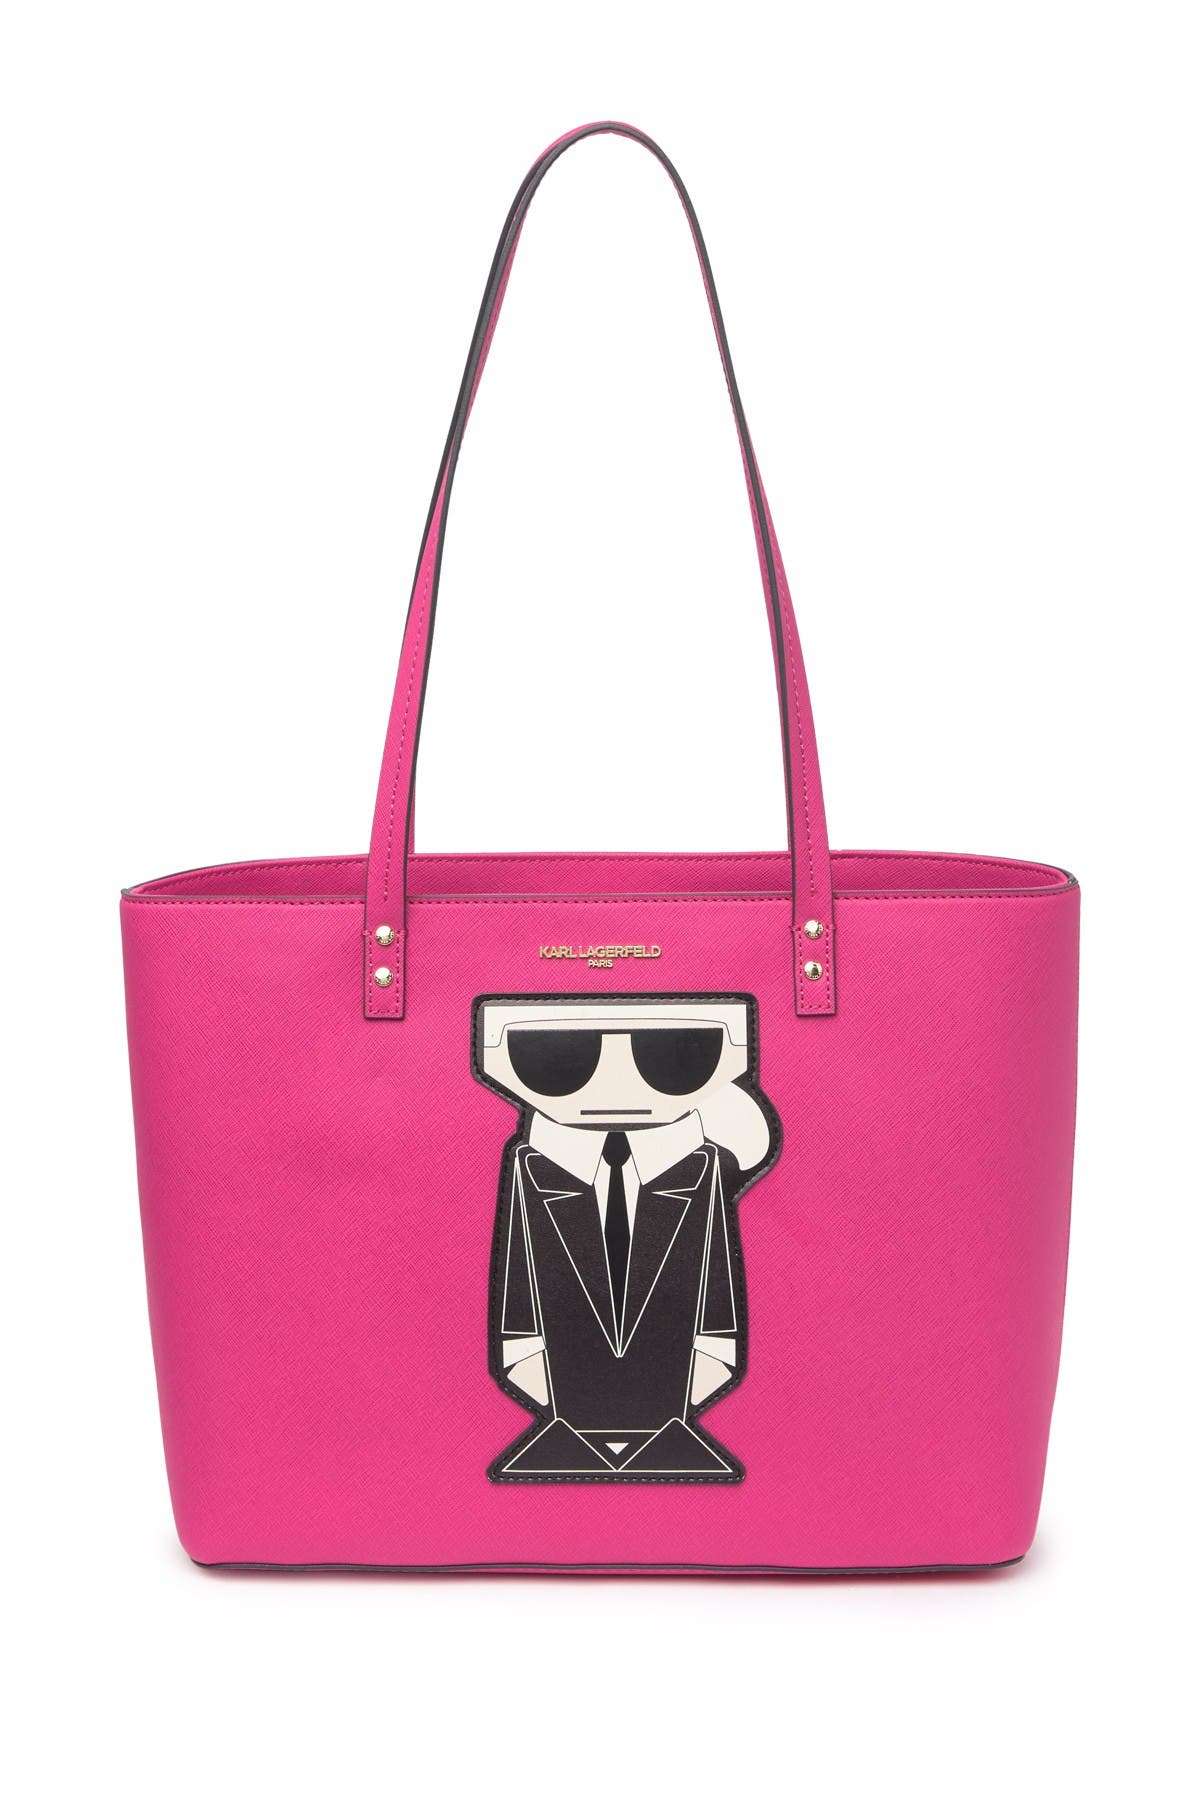 Karl Lagerfeld Maybelle Leather Printed Tote In Pink